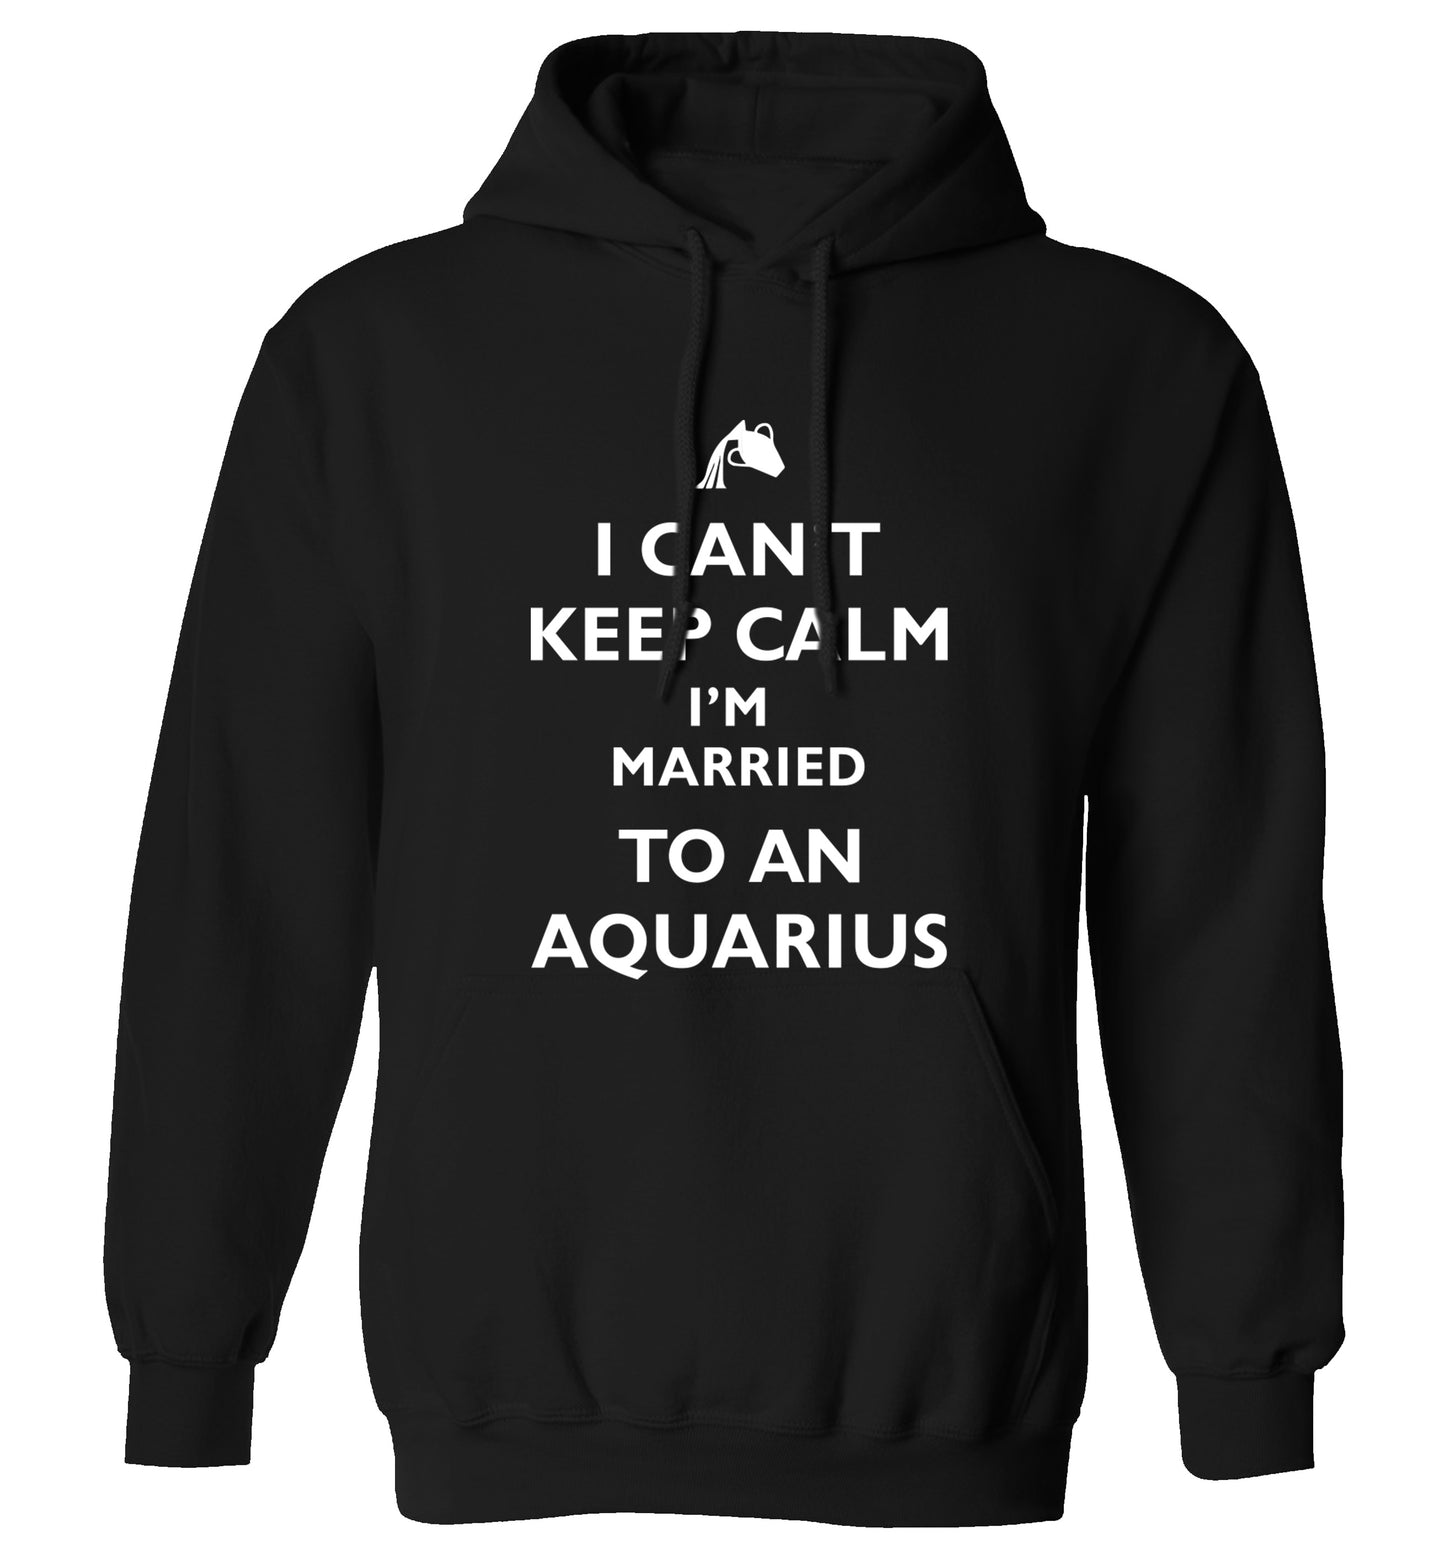 I can't keep calm I'm married to an aquarius adults unisex black hoodie 2XL